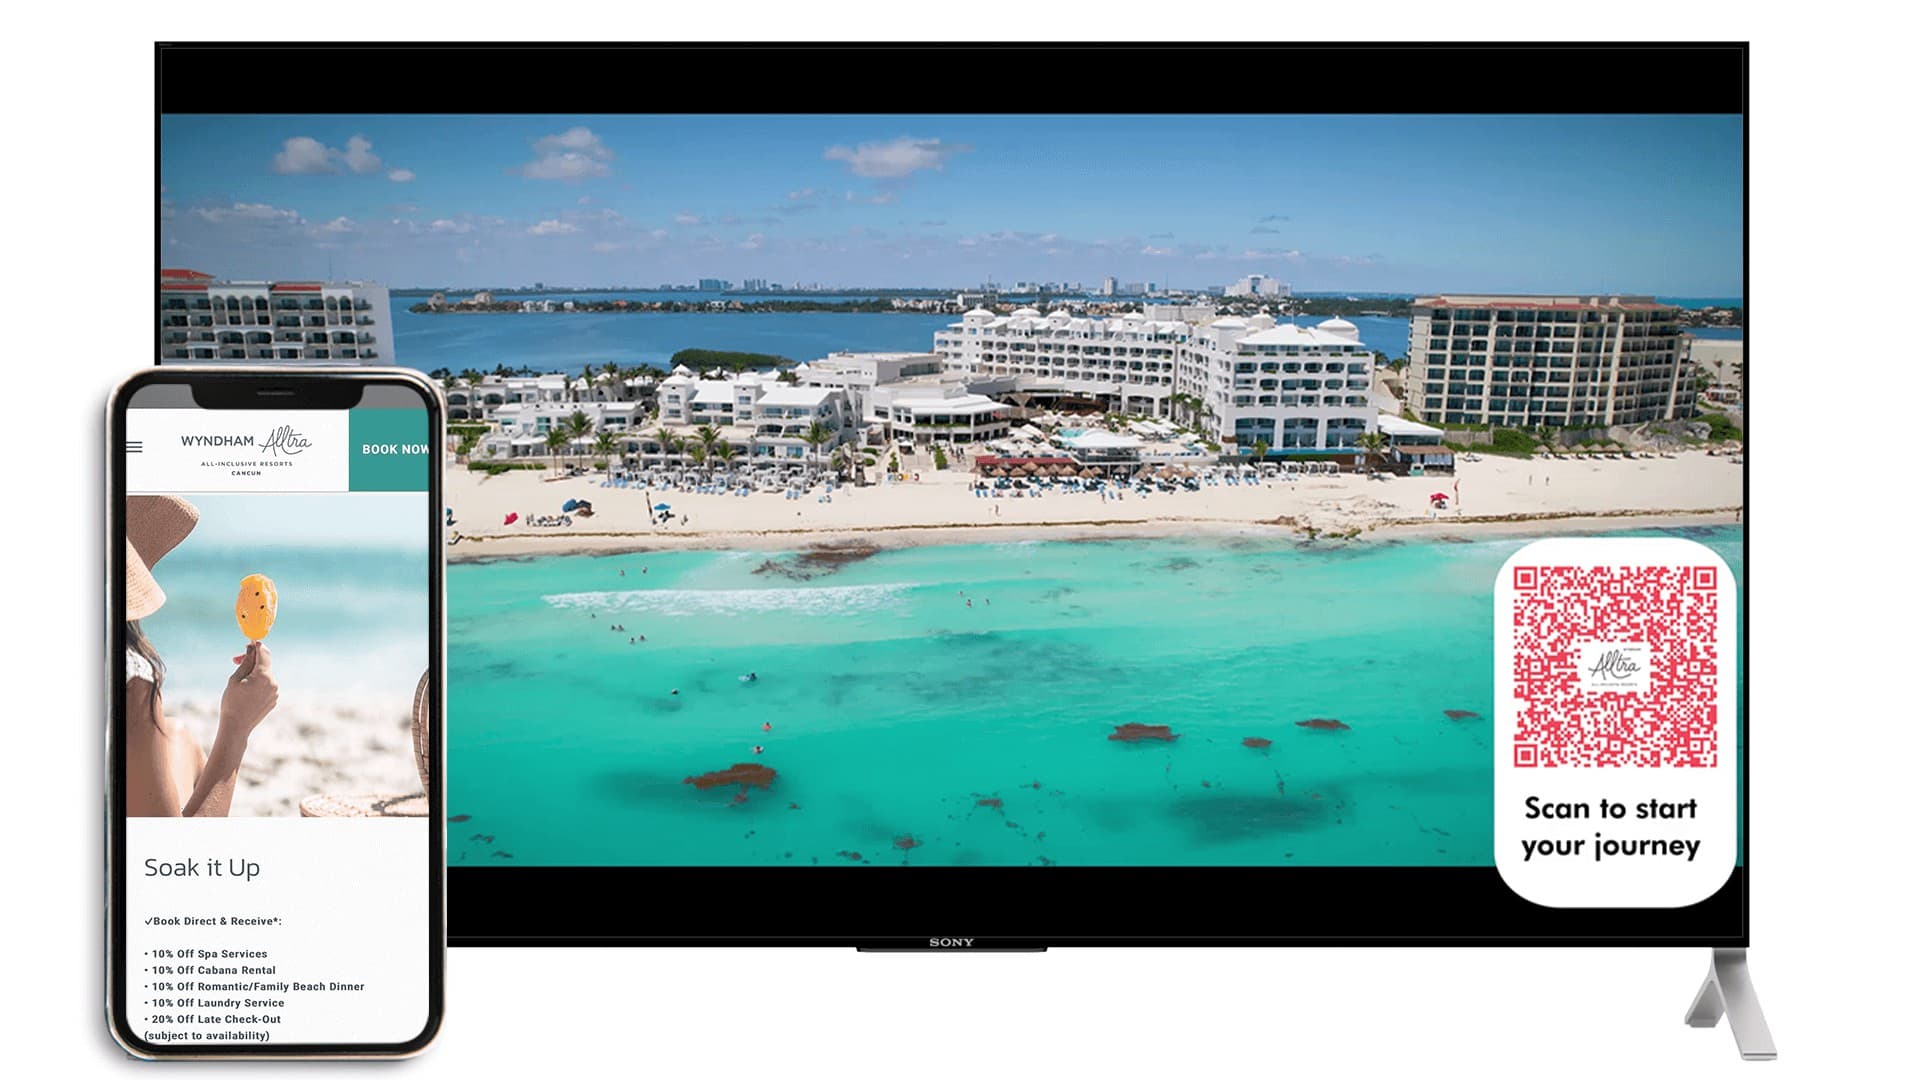 Playa Hotels & Resorts Leverages CTV Advertising To Boost Engagement And Drive Bookings In 12 Markets